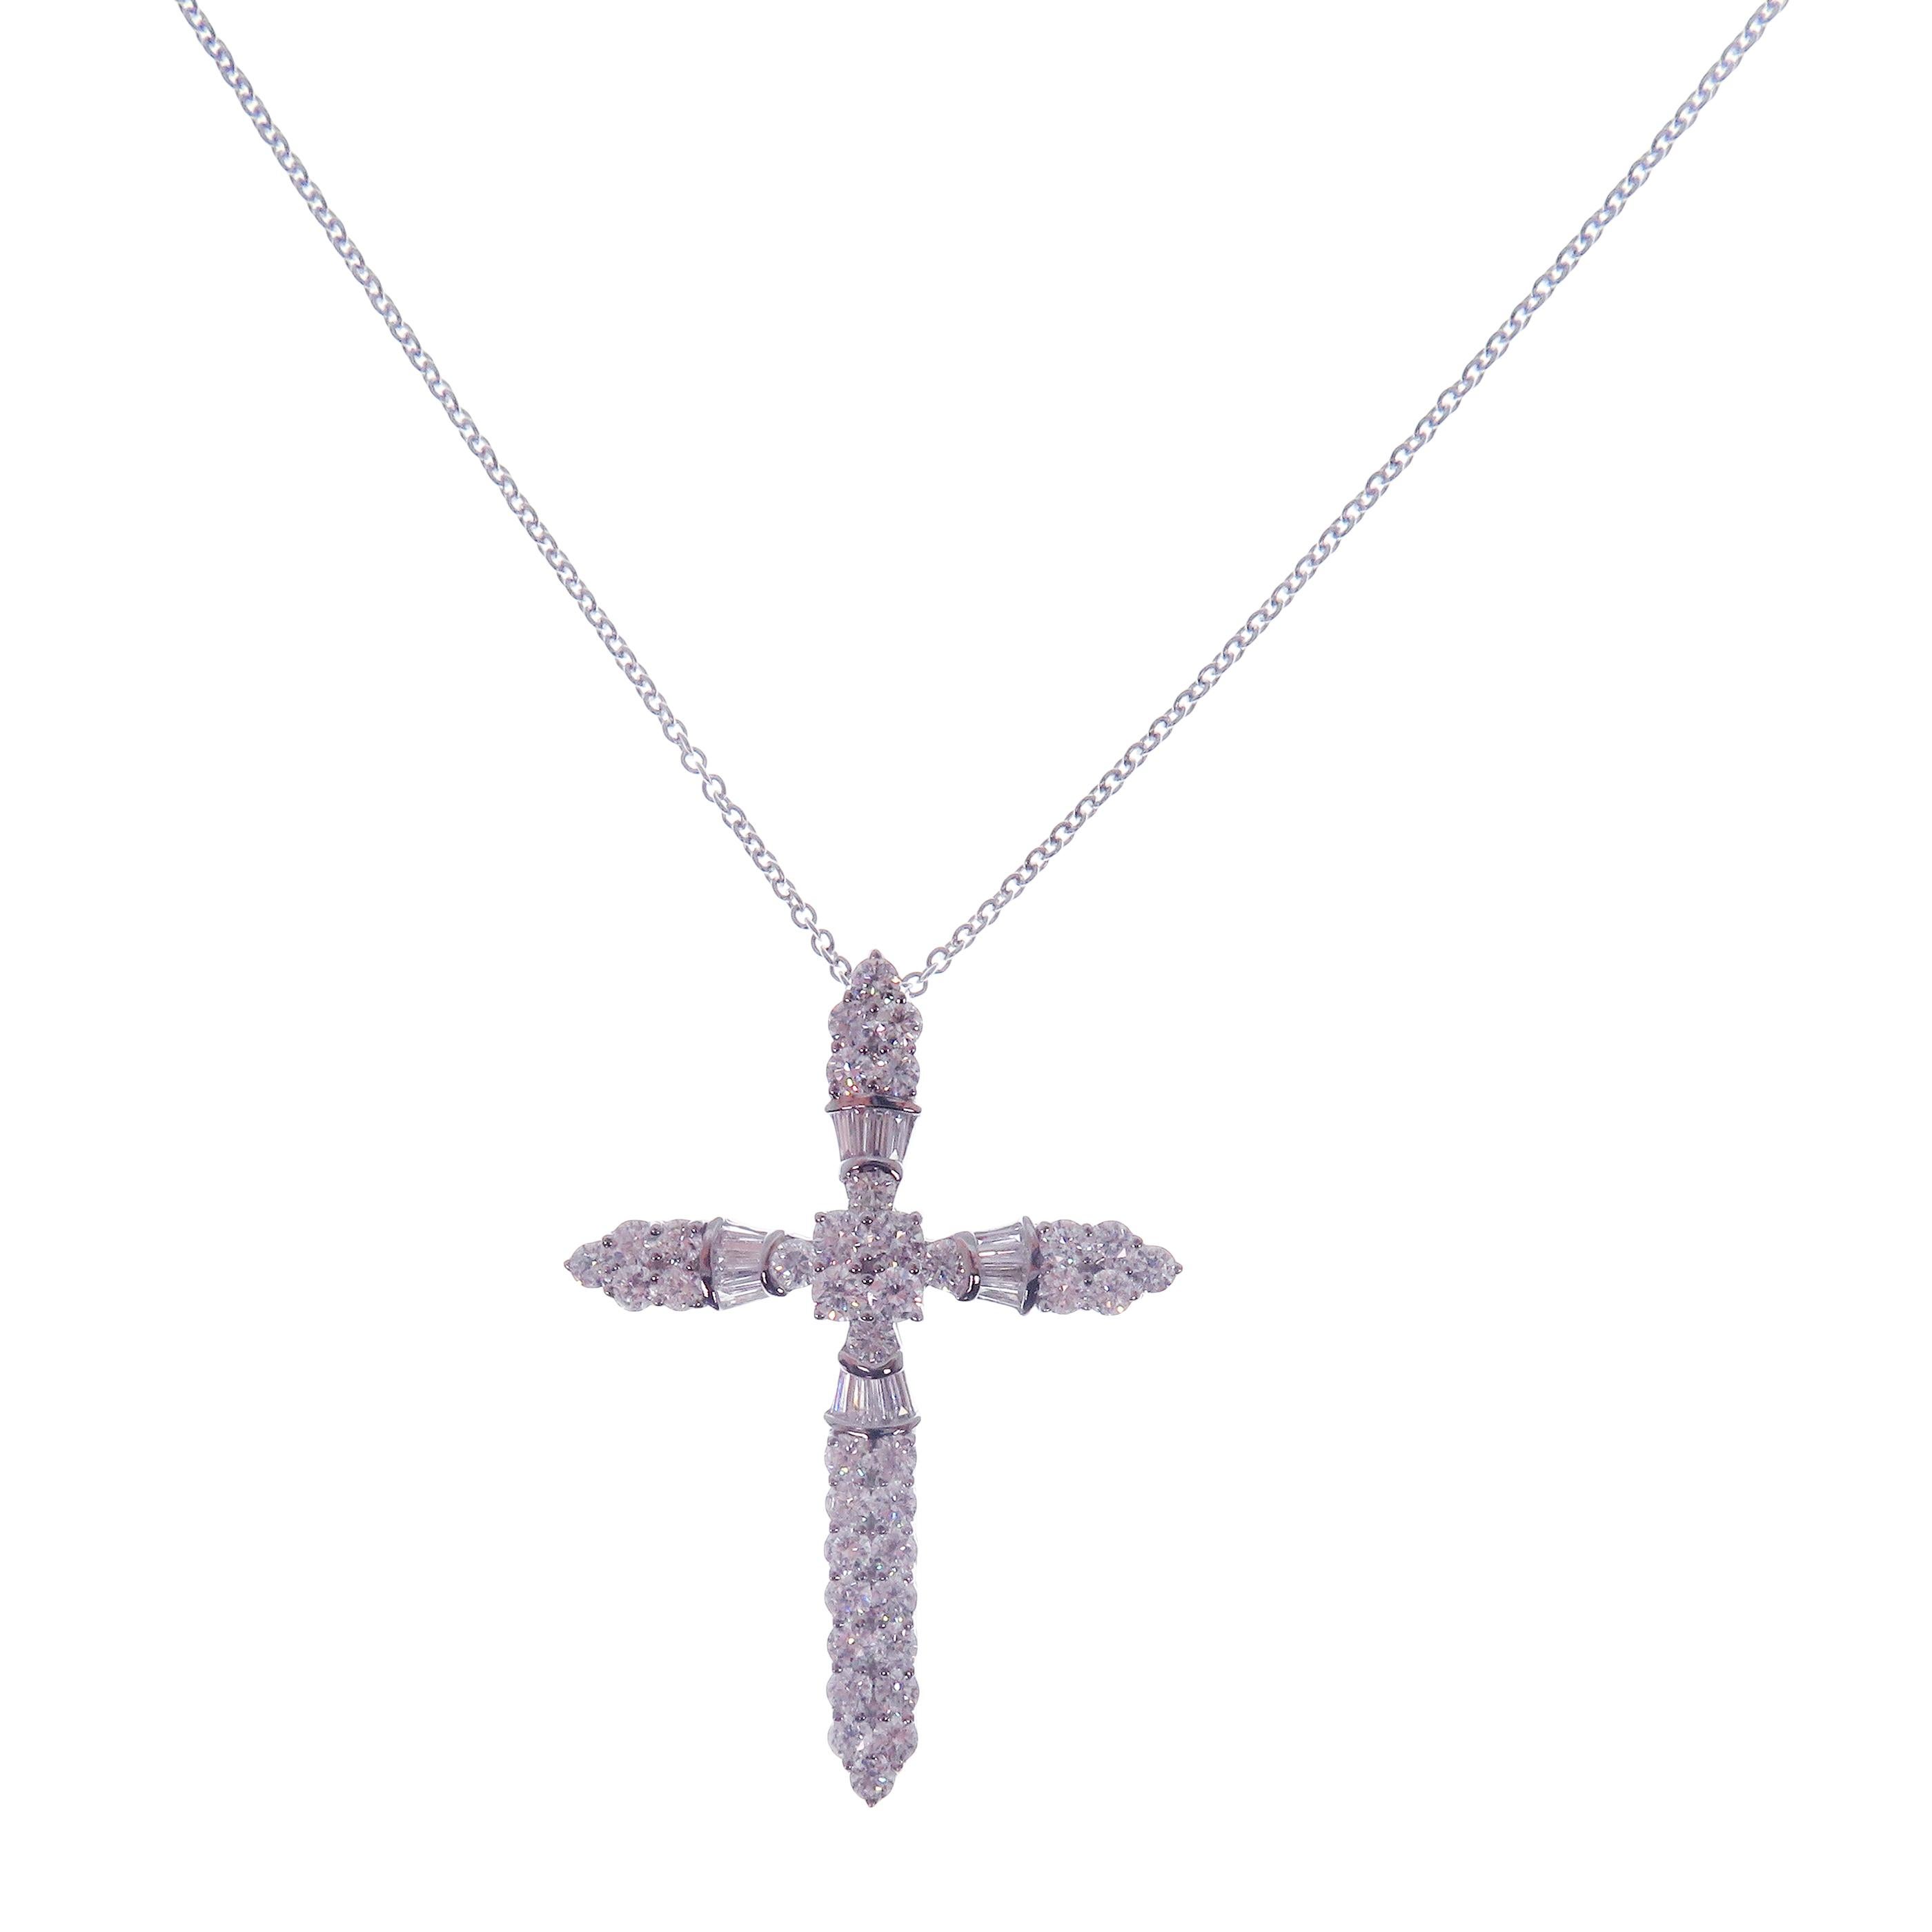 This diamond large cross necklace is crafted in 18-karat white gold, weighing approximately 1.95 total carats of SI-H Quality white diamonds.

Necklace is 16